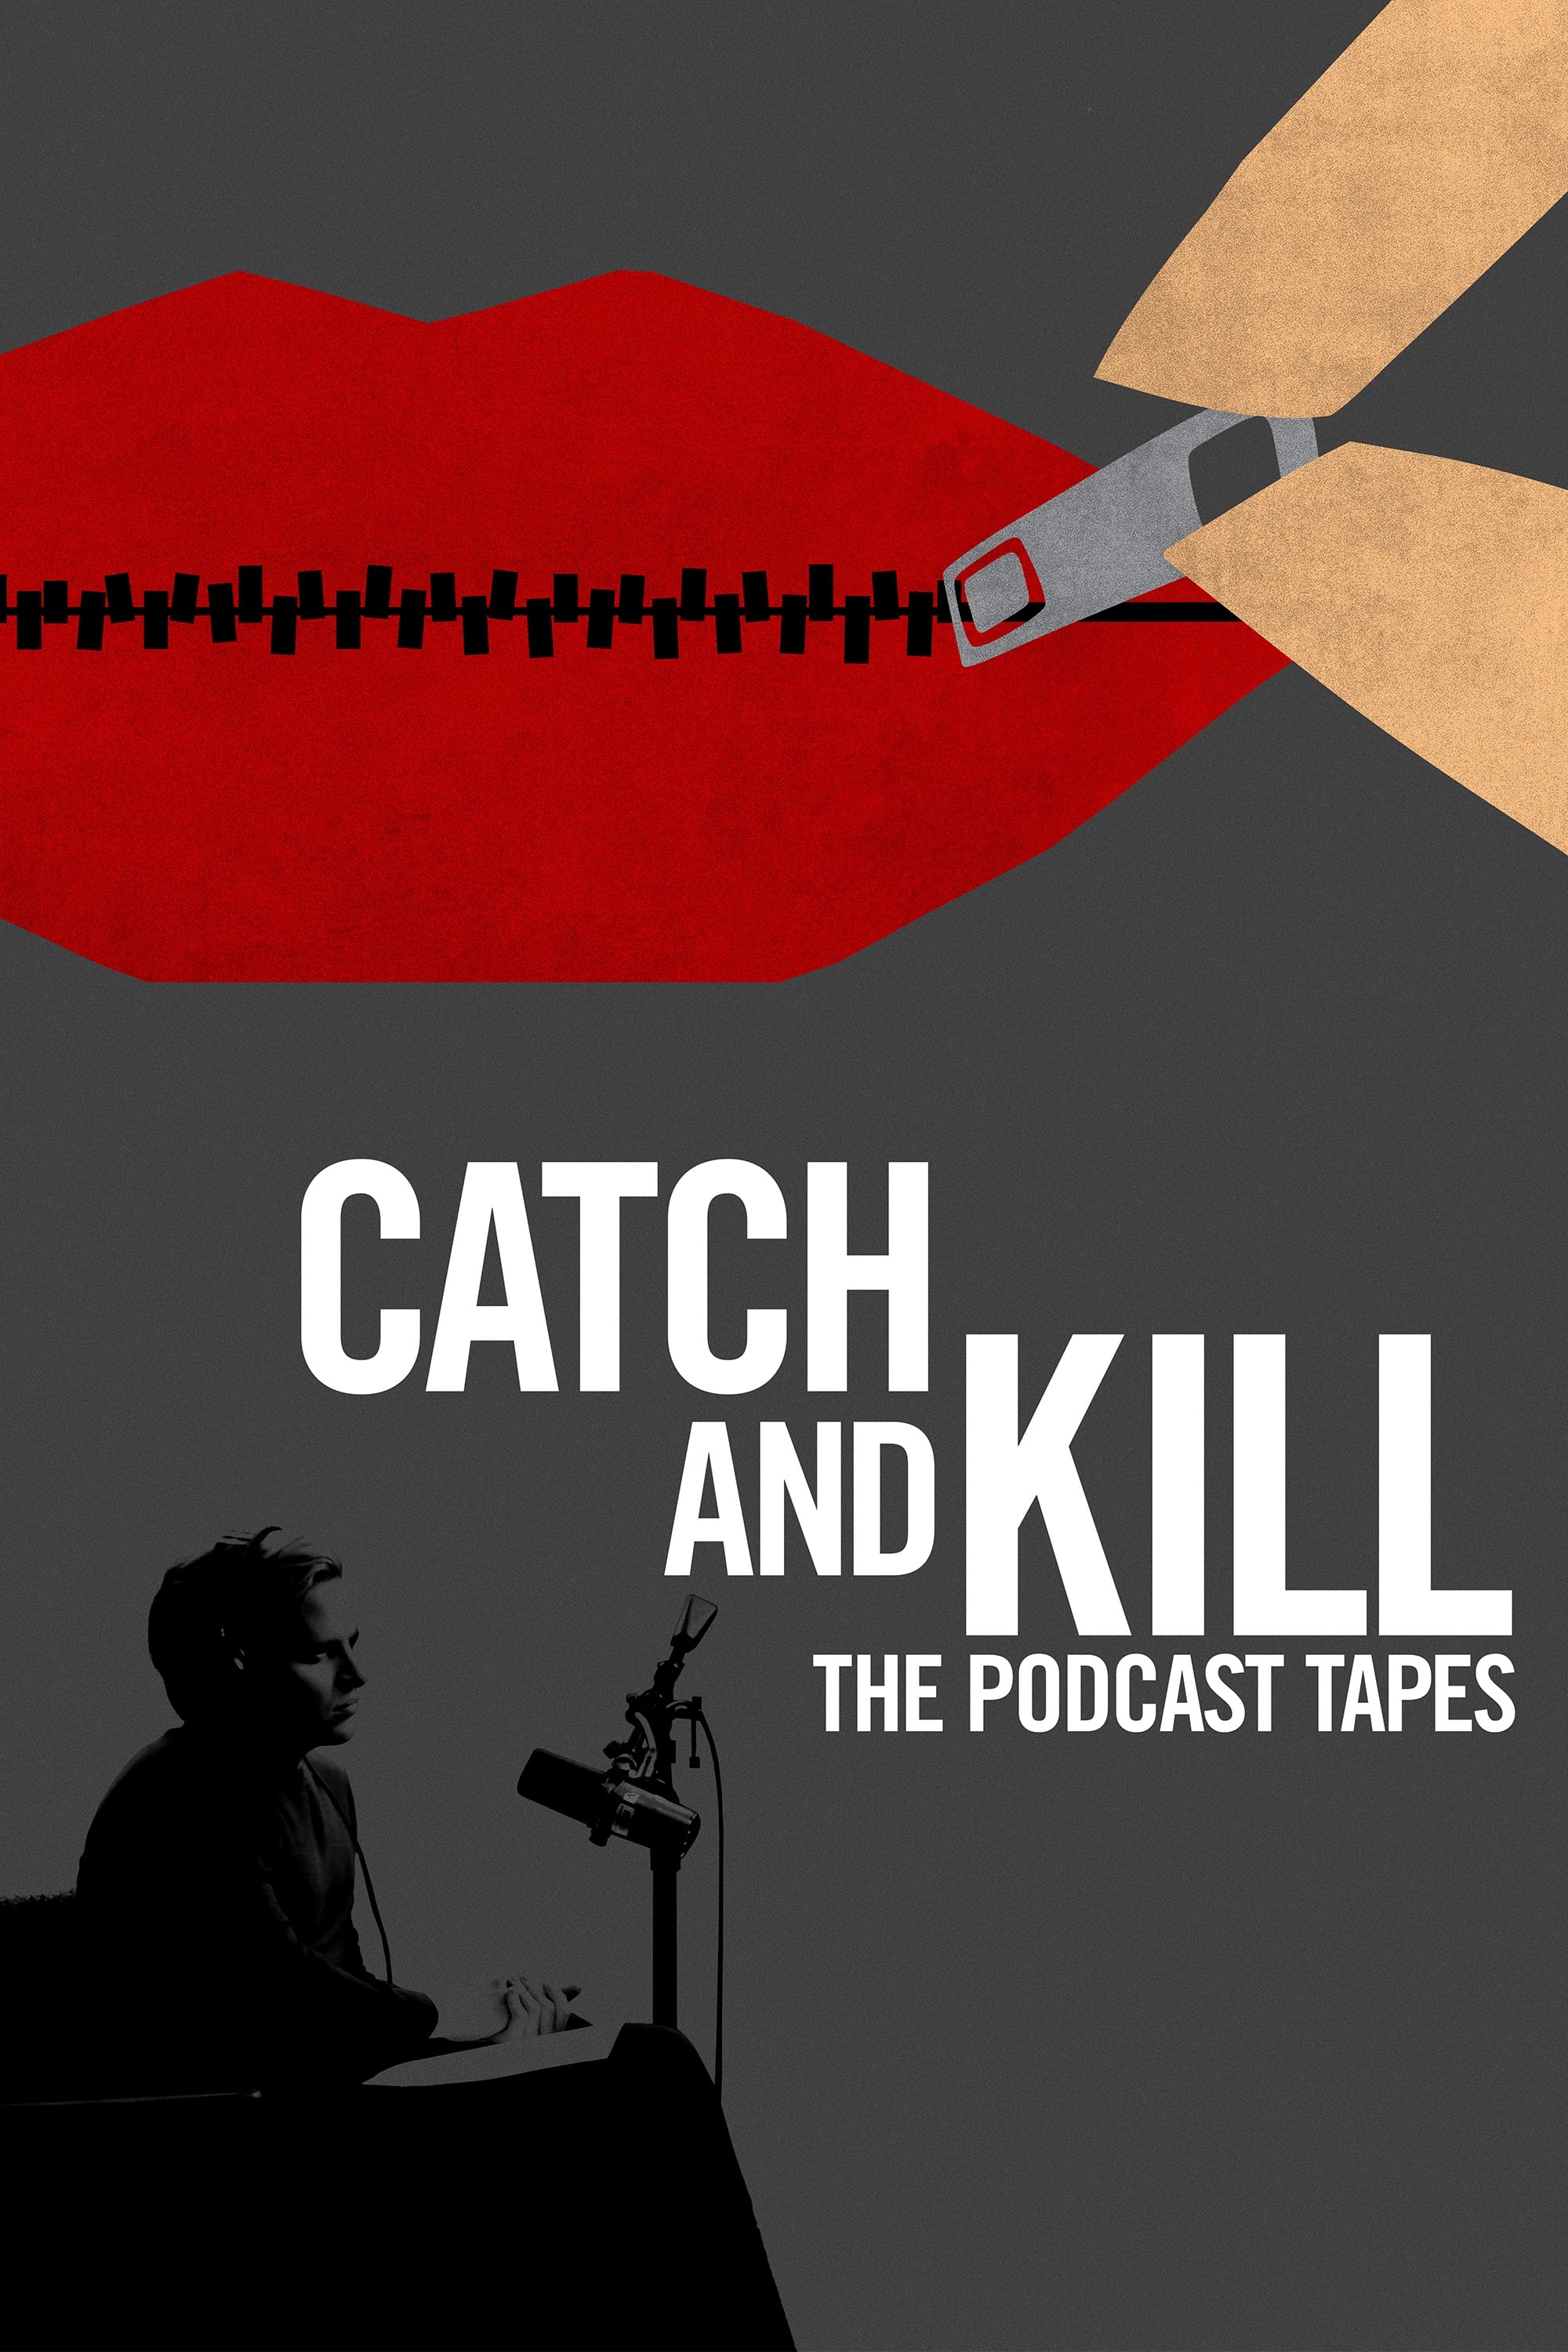 Catch and Kill: The Podcast Tapes TV Shows About Abuse